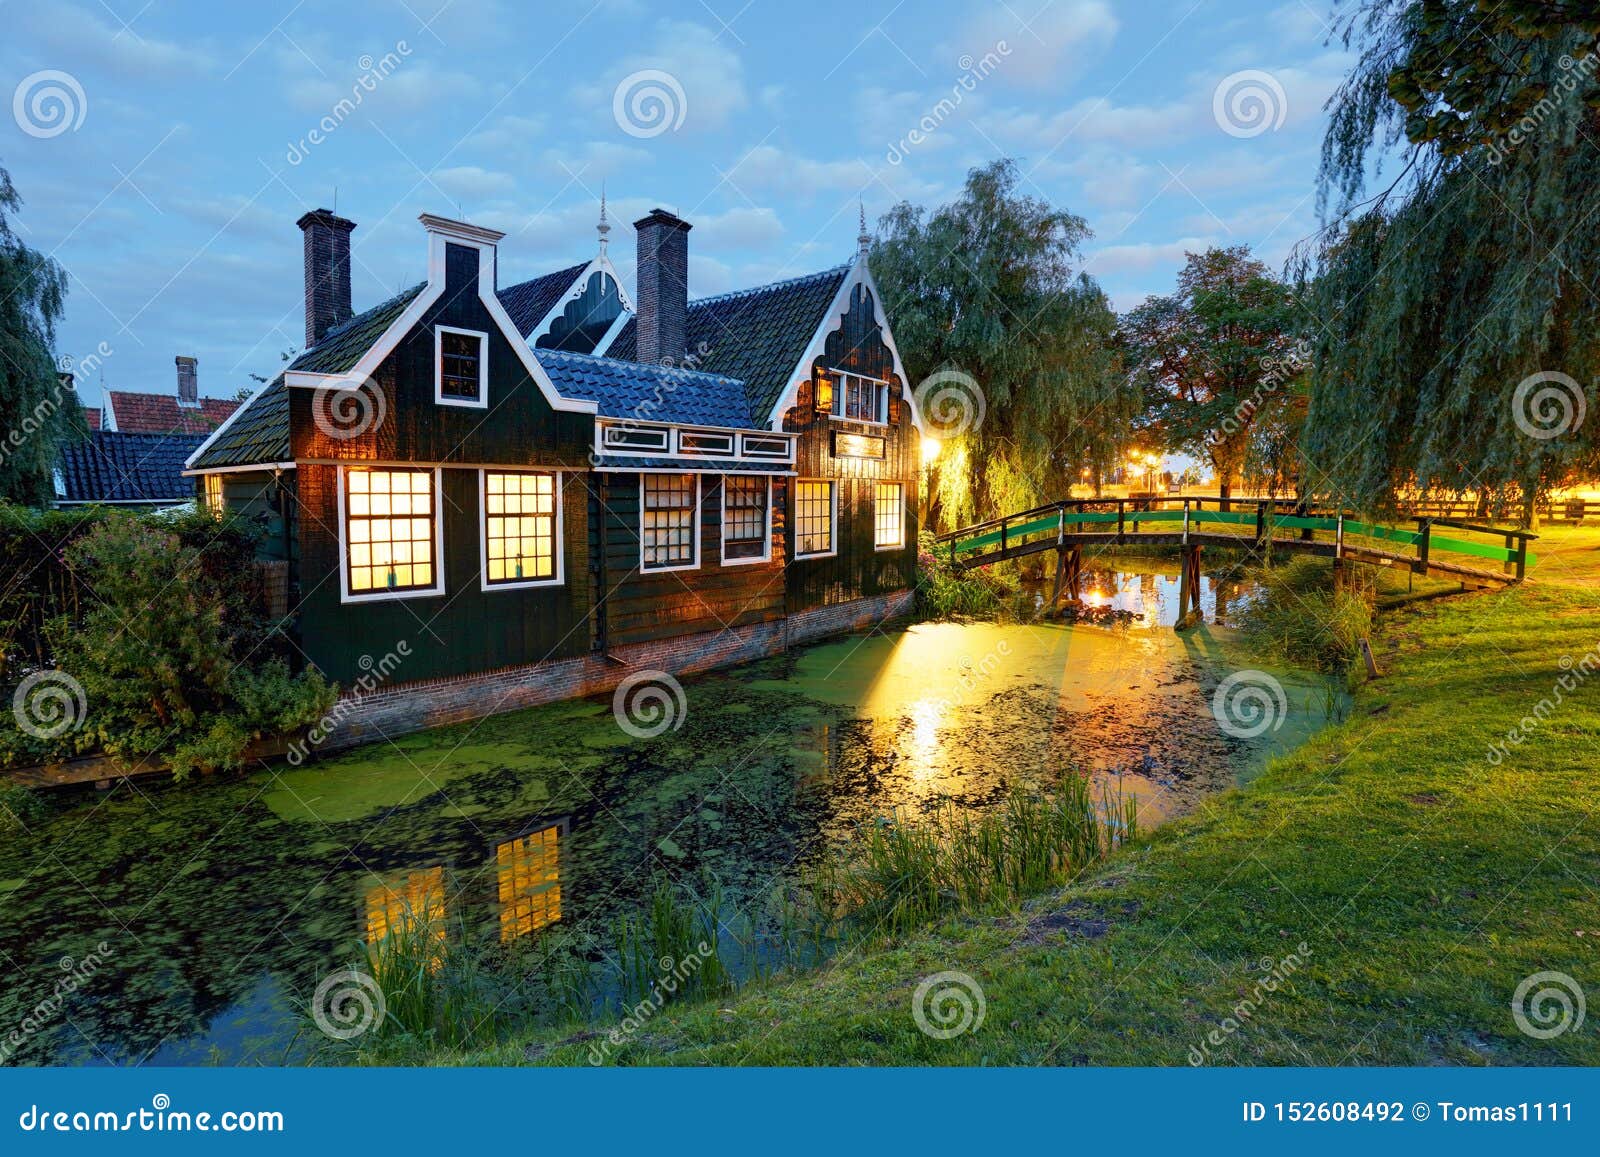 Traditional House at the Historic Village of Zaanse Schans, Netherlands ...